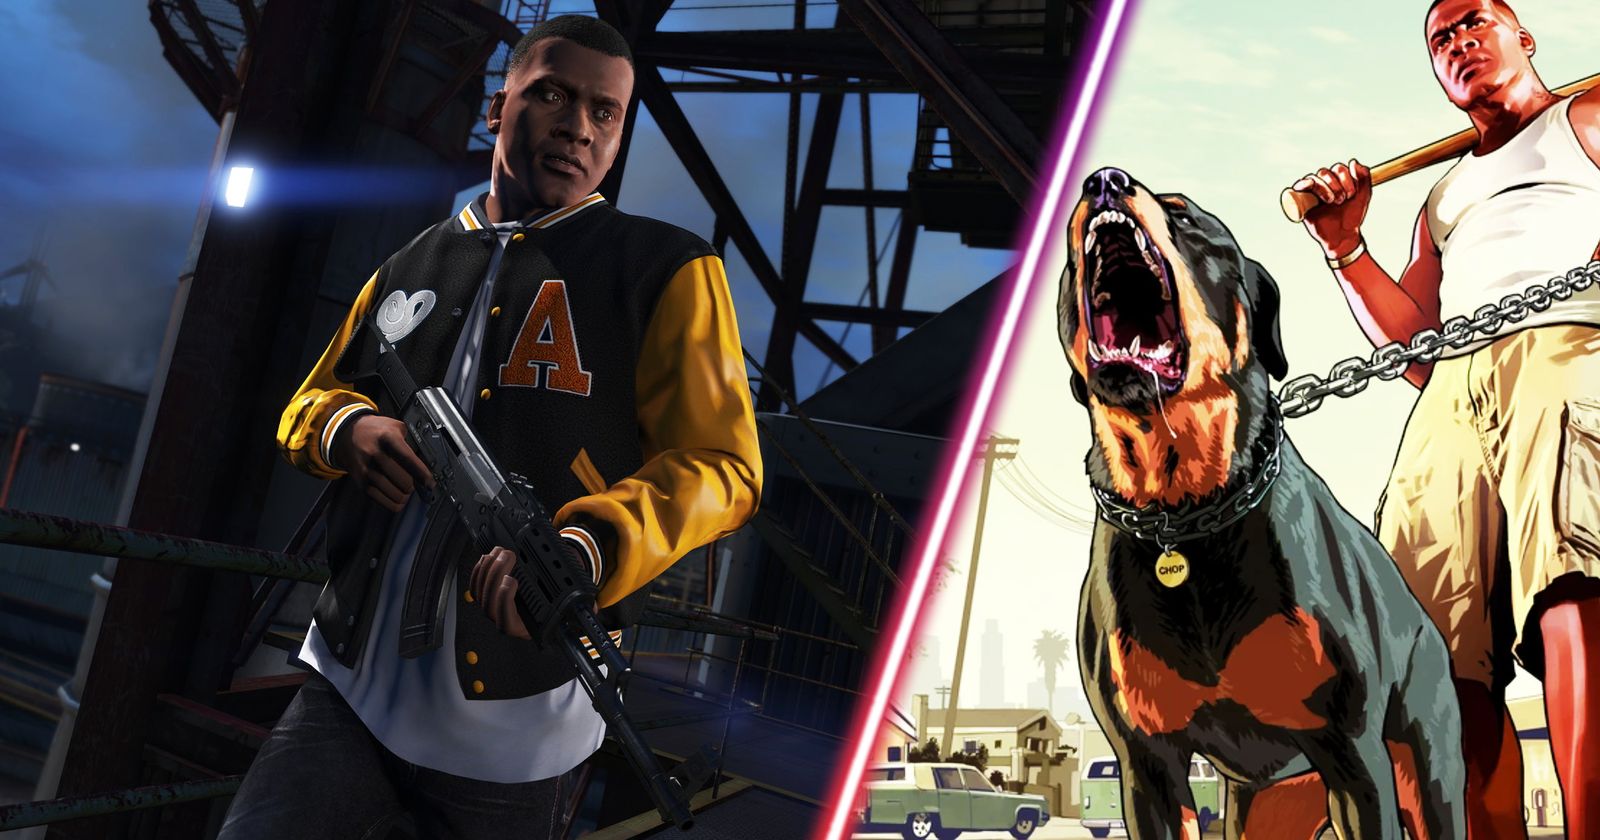 Train Franklin's mutt with Grand Theft Auto 5 app iFruit - Polygon